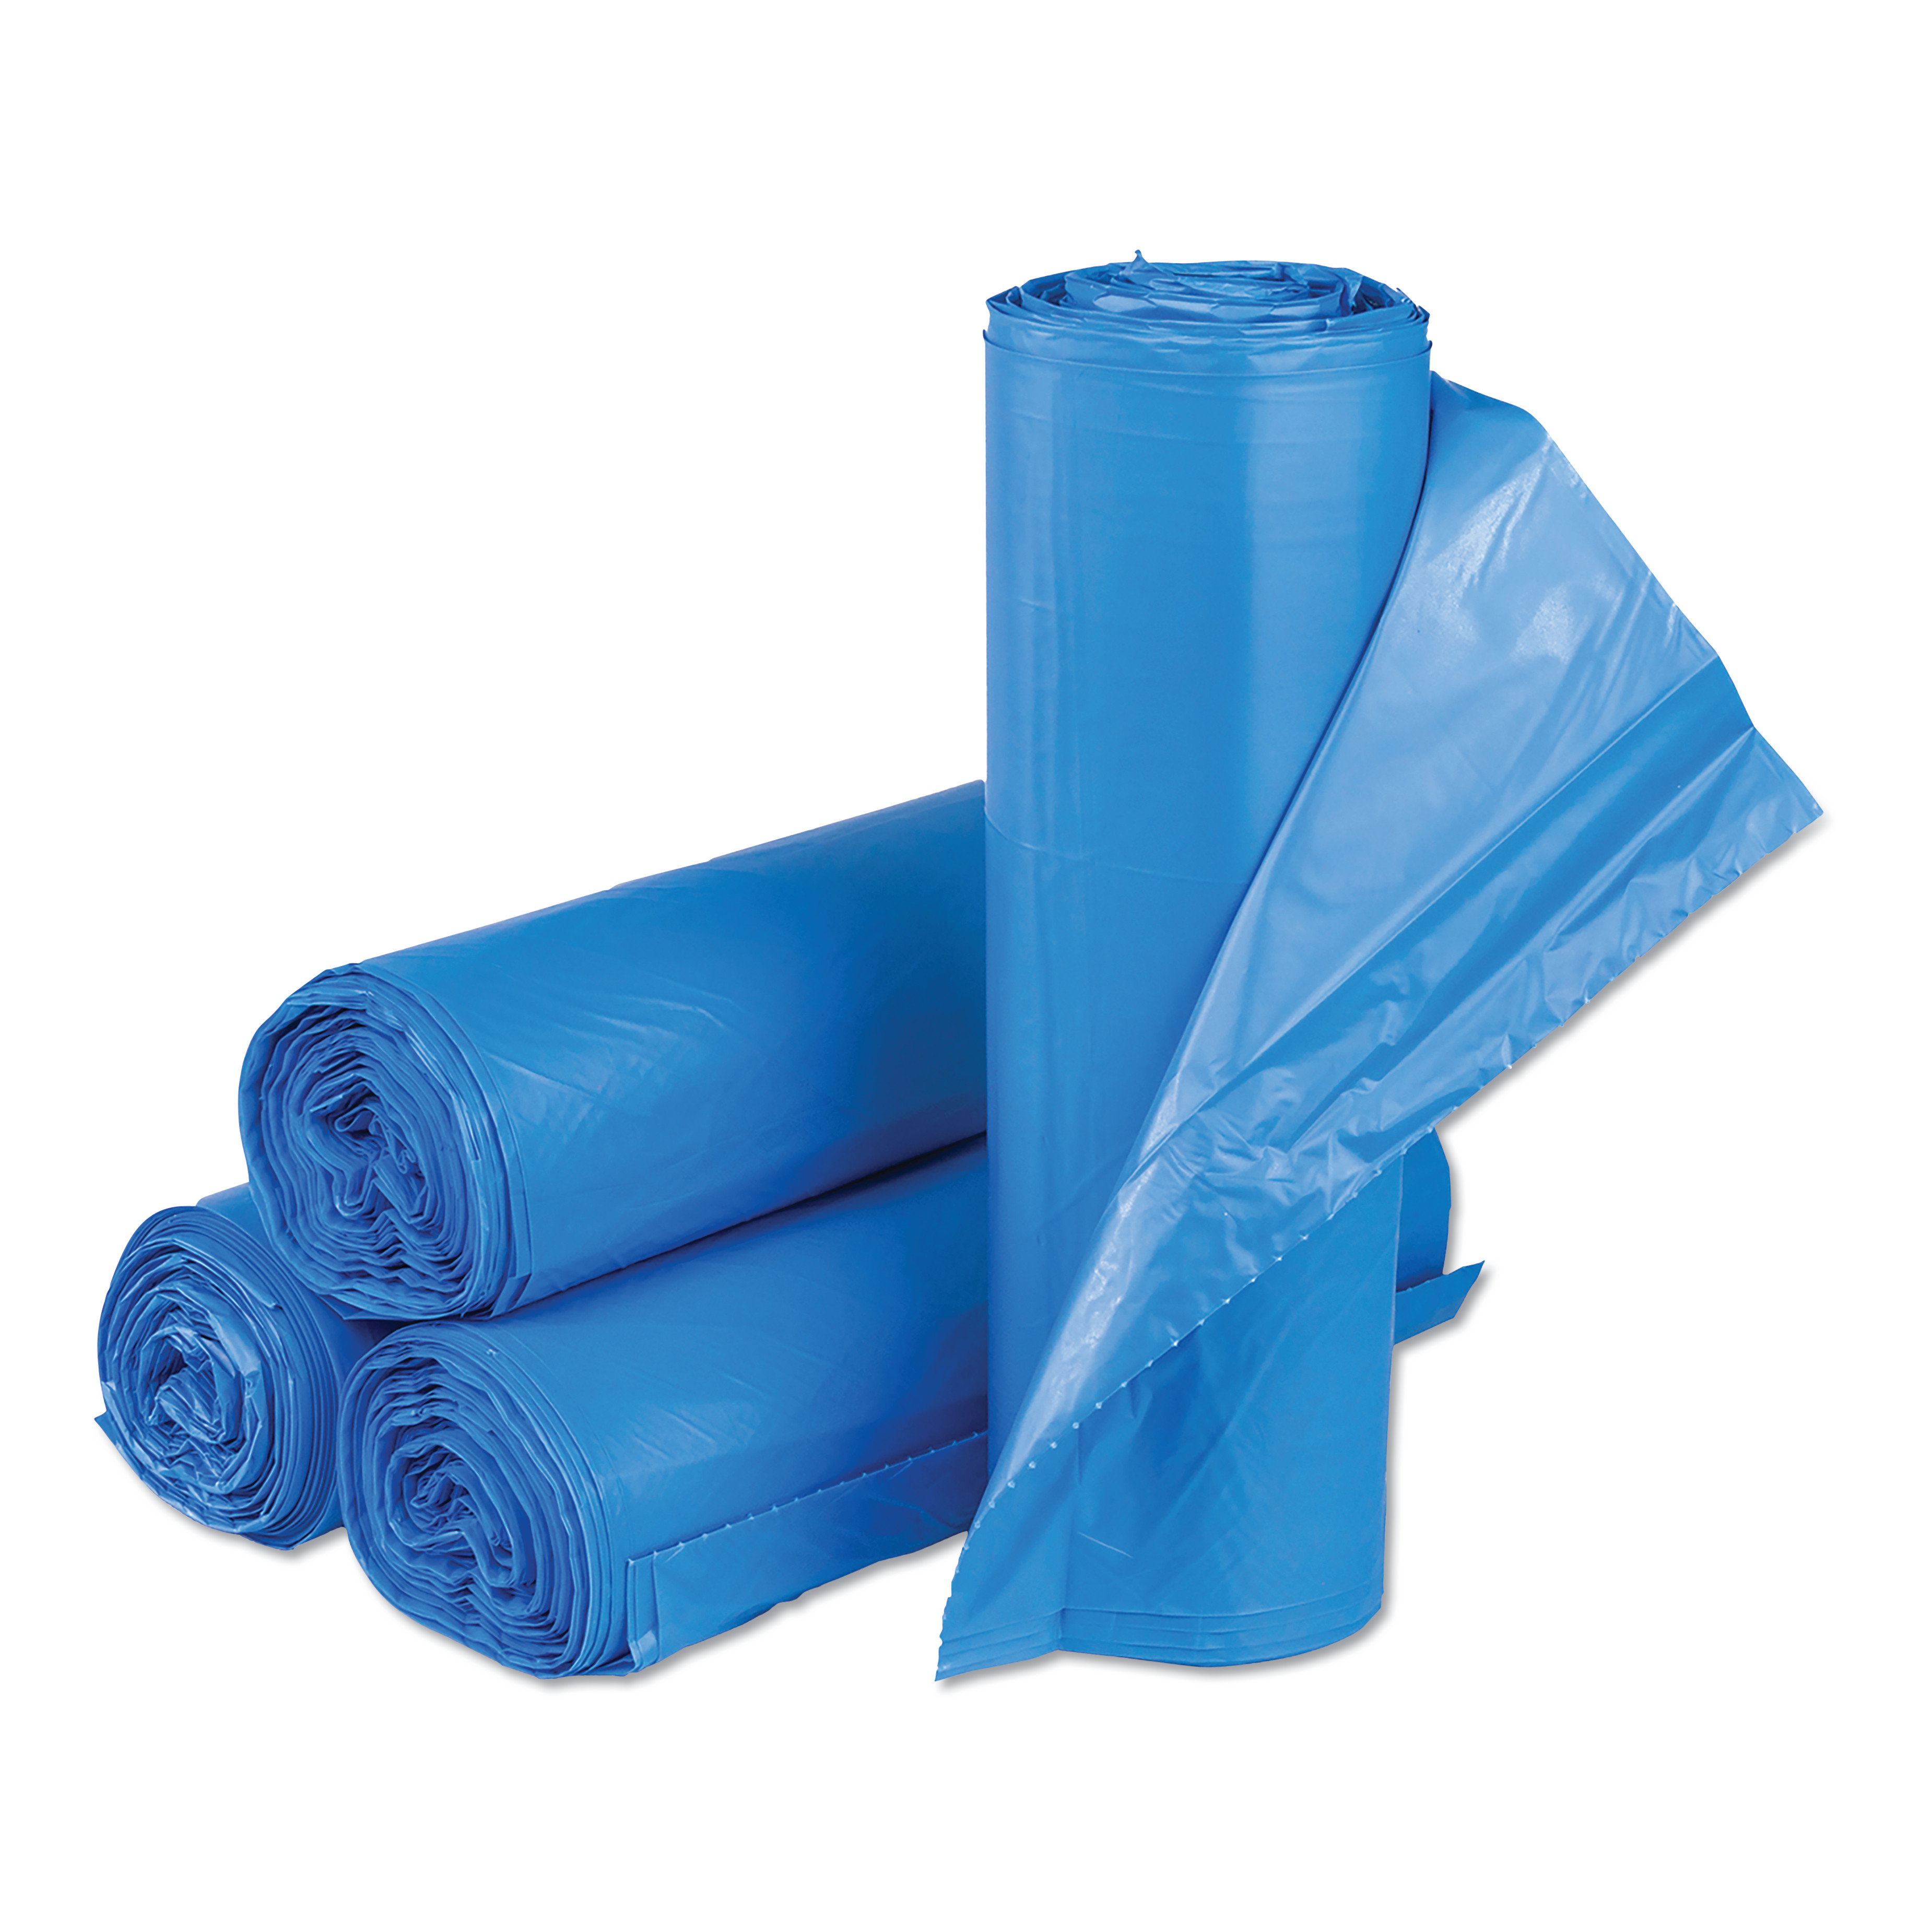 Bagtron Can Liners CL2433NA8 24 x 33 12-16 gallon qty1000, 50bags/roll,  20rolls/ctn Natural